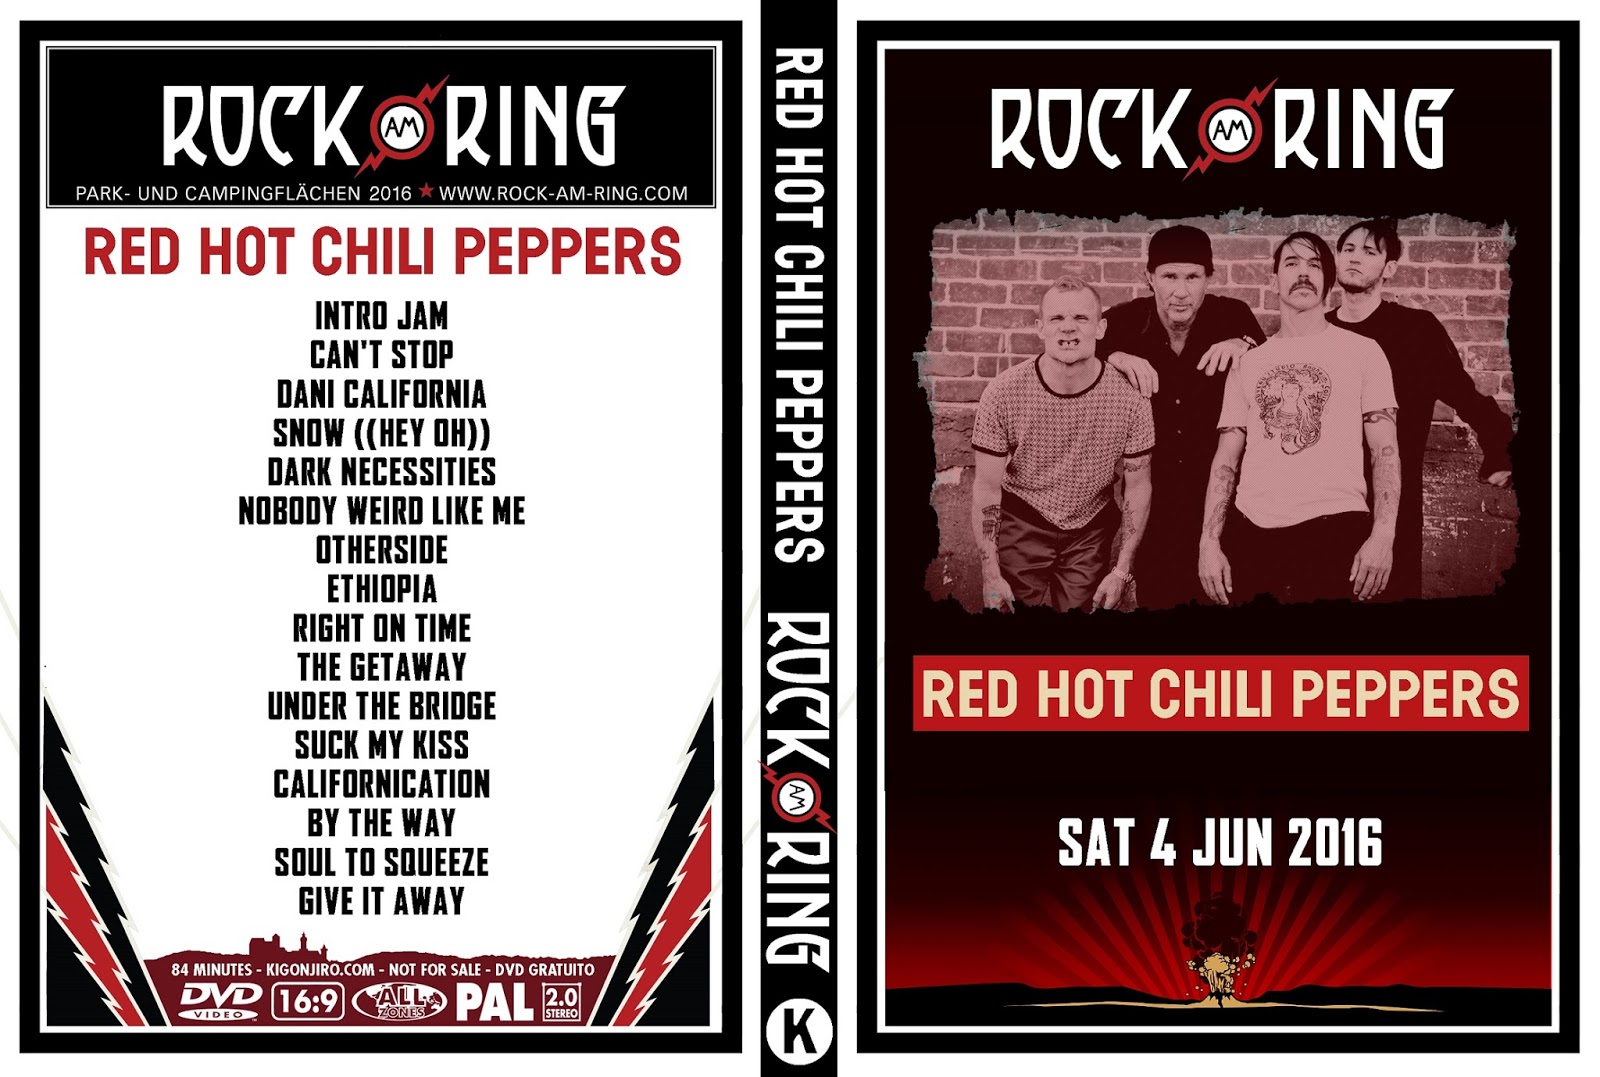 Red hot chili peppers necessities. Red hot Chili Peppers обложка. The Getaway альбом Red hot Chili Peppers. The Getaway Red hot Chili Peppers обложка. Red hot Chili Peppers обложки дисков.